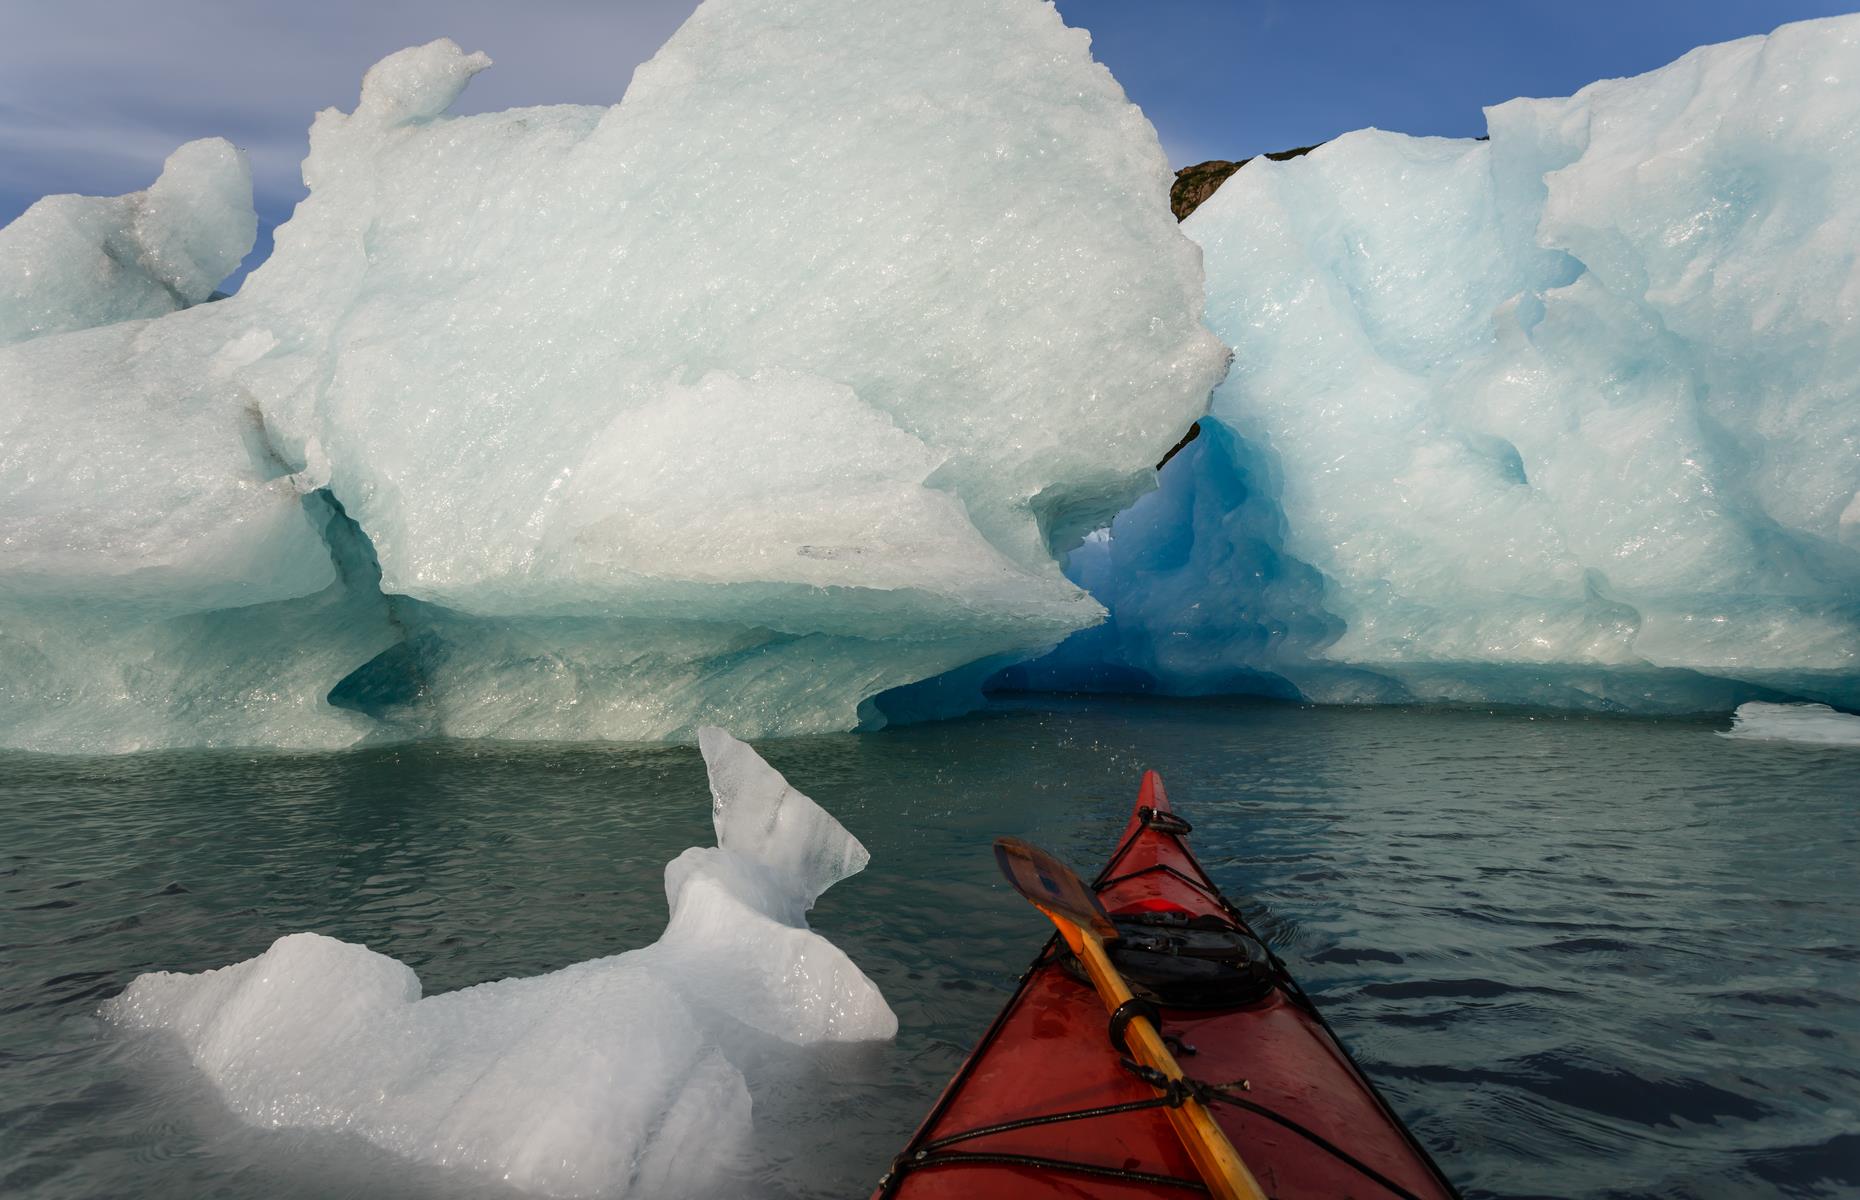 <p>You haven’t seen a glacier until you’ve seen it from a kayak. The chilly waters of Kenai Fjords National Park, home to orcas, sea otters and humpback whales, are lined with jagged blue and white ice. Conditions can be windy and choppy so a <a href="https://www.nps.gov/kefj/planyourvisit/kayak-guides.htm">guided tour</a> is recommended for less-experienced paddlers. Due to the area's remote location, make sure you check the latest updates before visiting.</p>